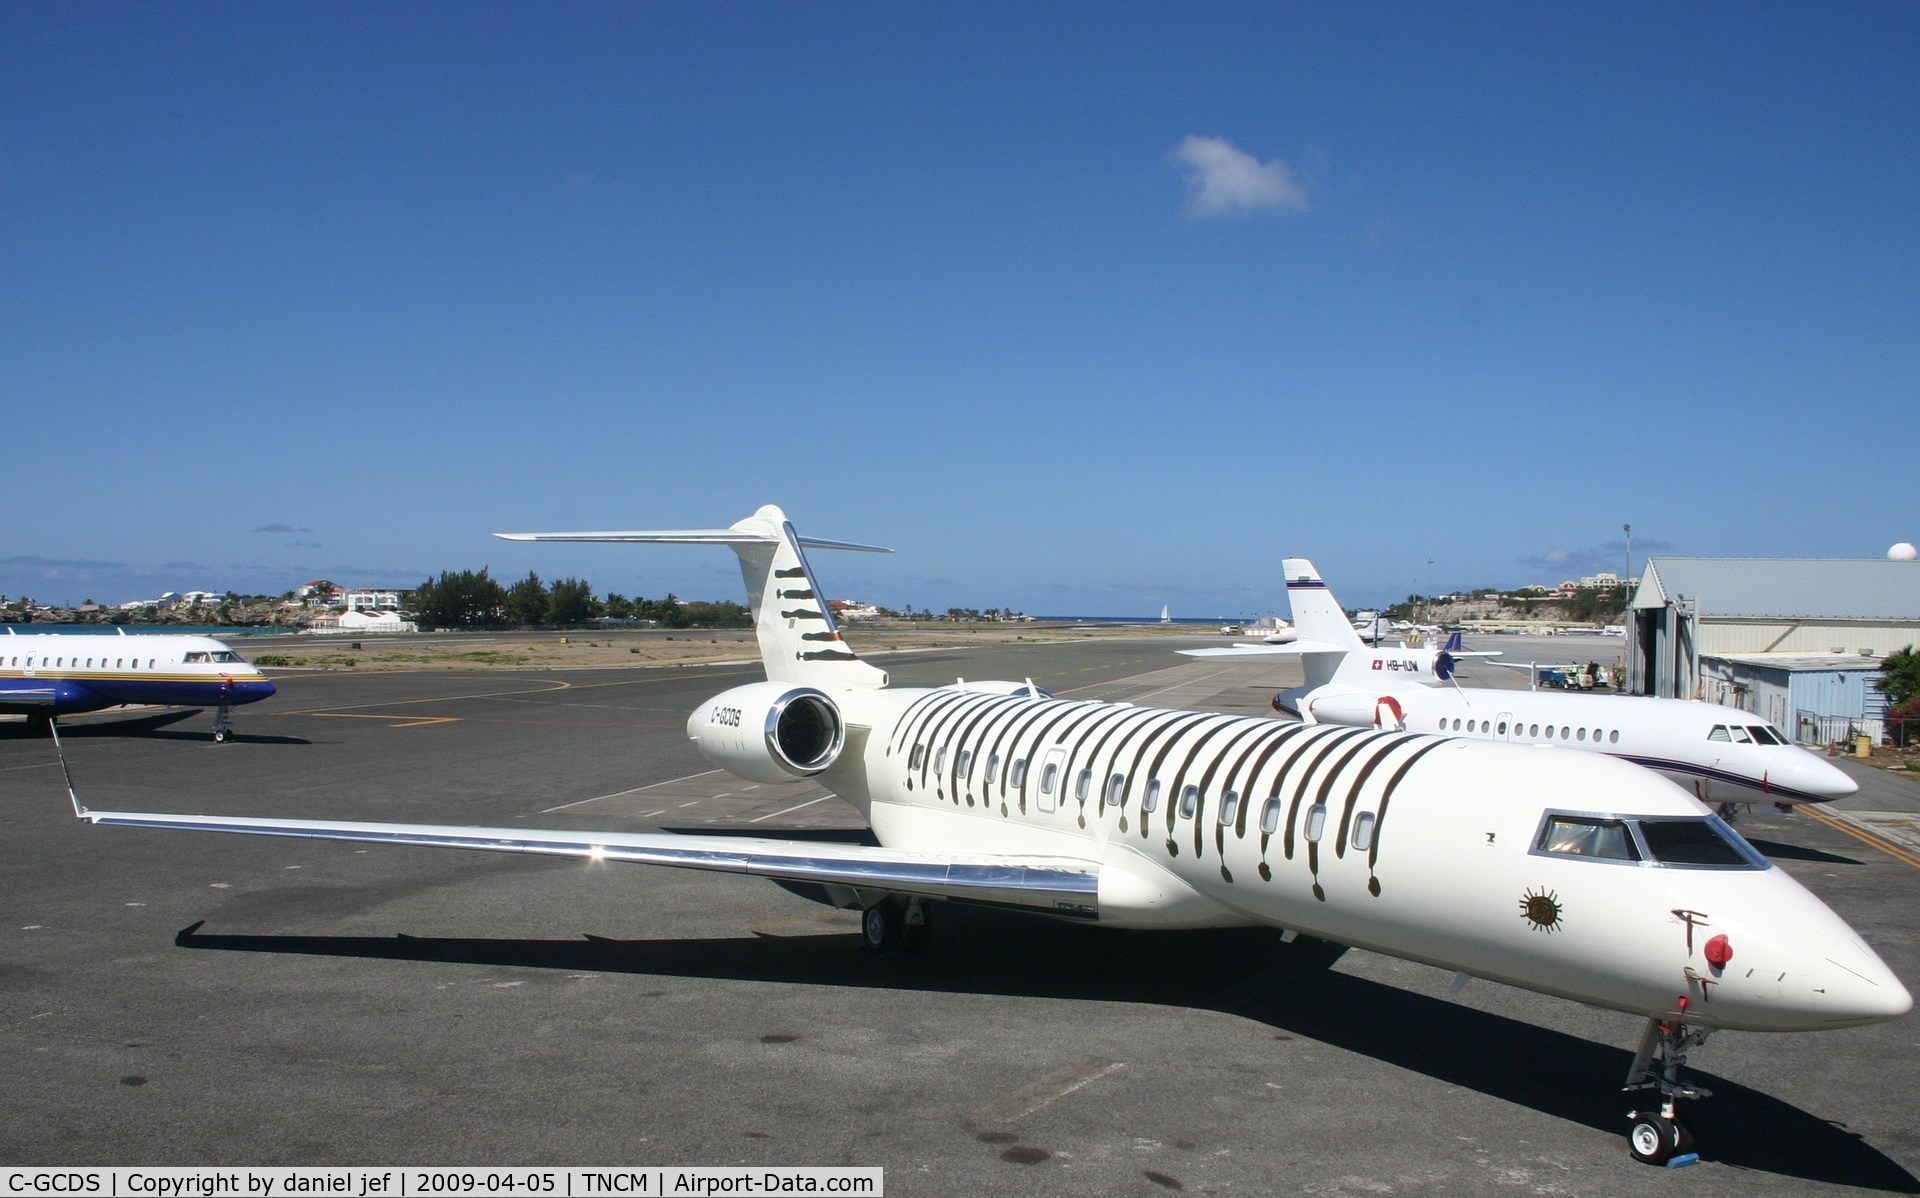 C-GCDS, 2003 Bombardier BD-700-1A10 Global Express C/N 9137, a new day has come